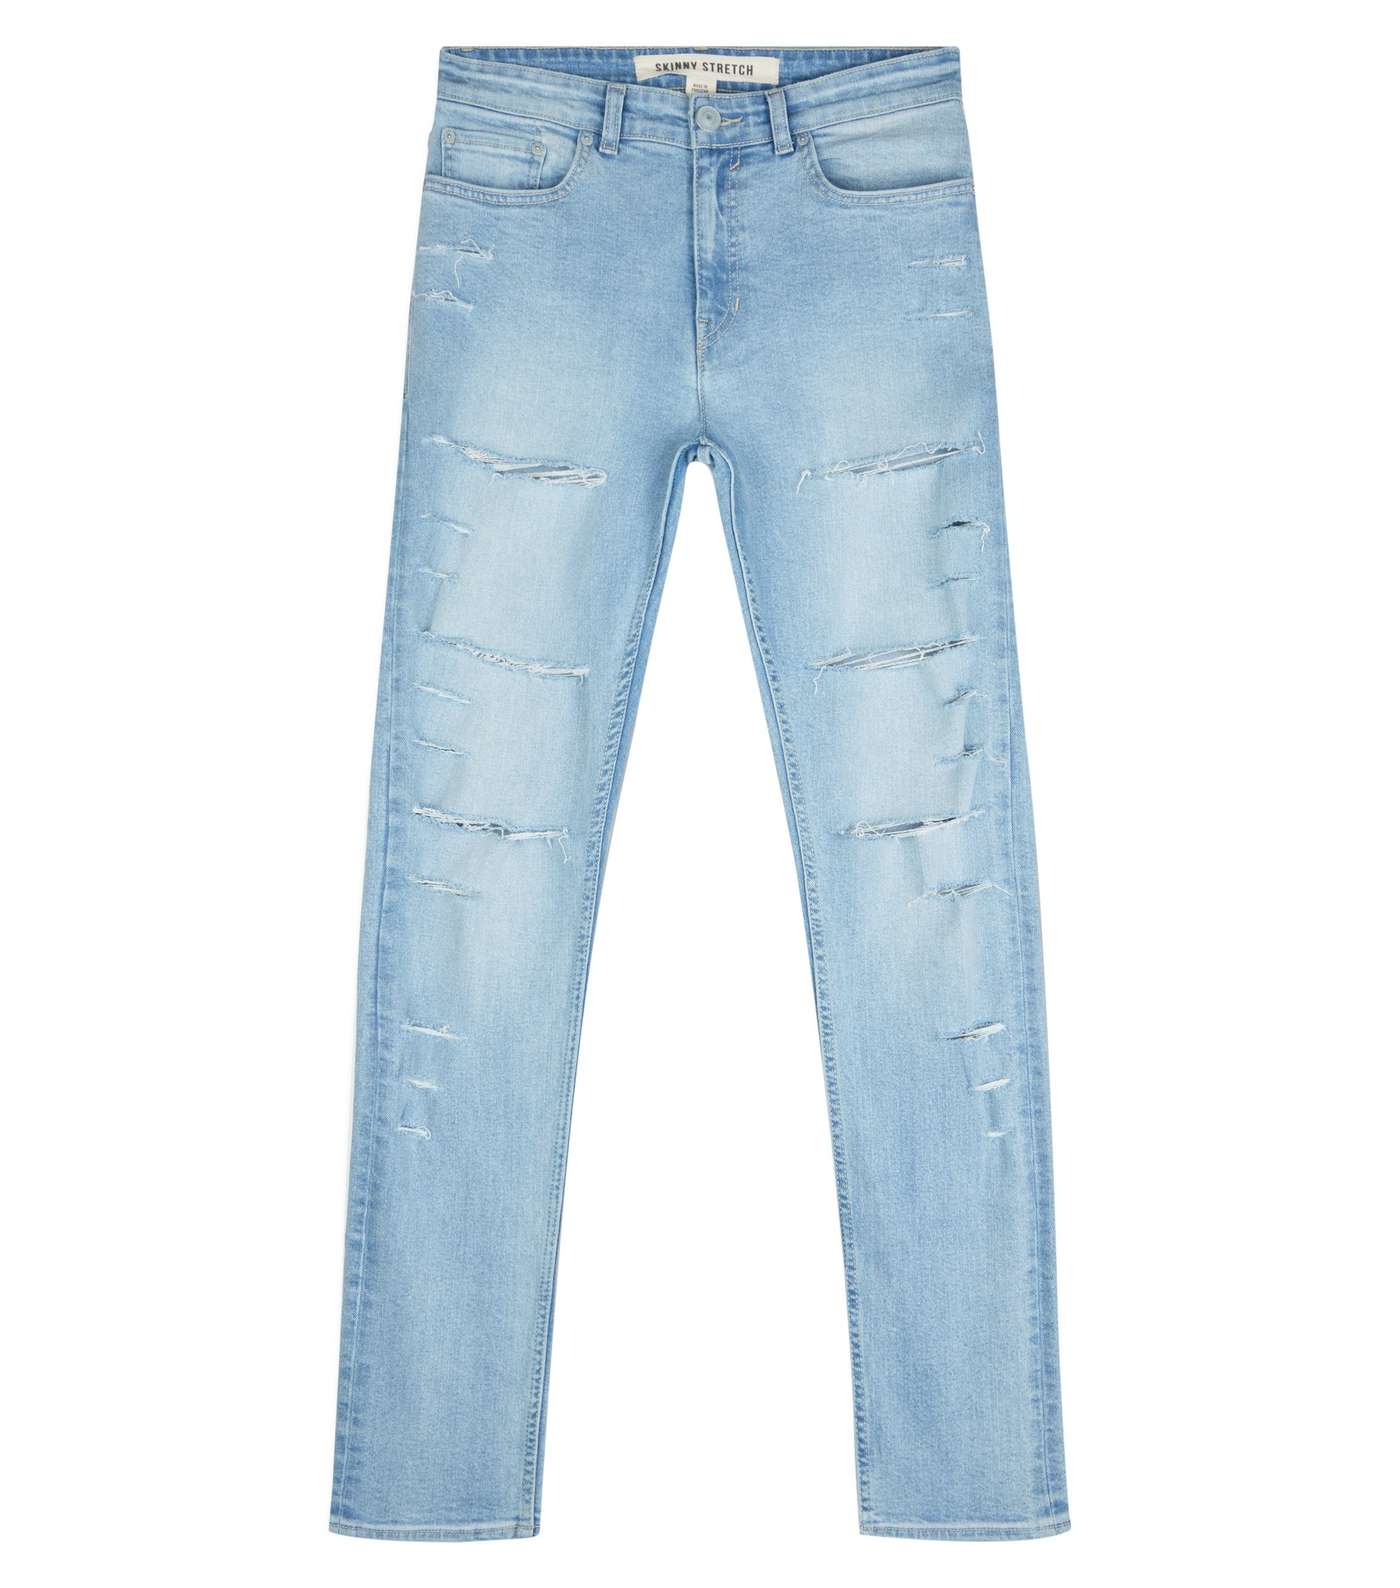 Blue Bleach Wash Ripped Skinny Stretch Jeans Image 4